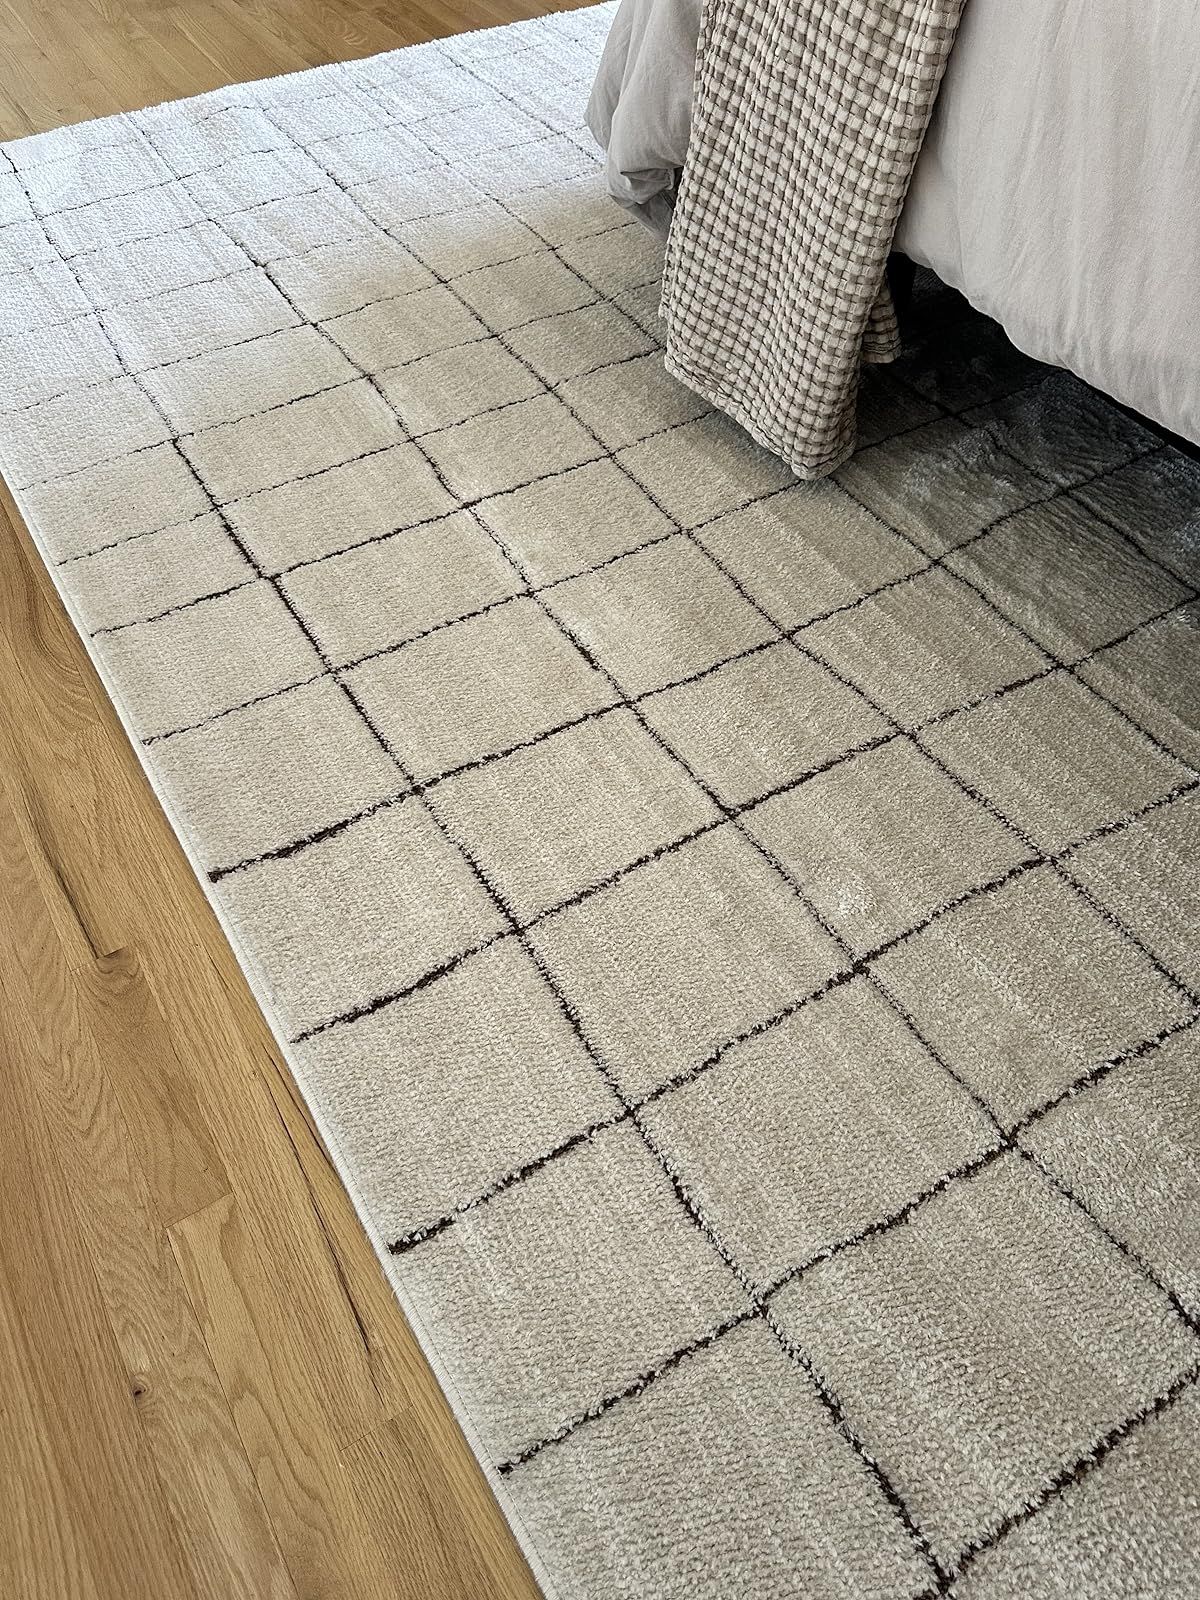 Love our new bedroom rug! This is Our PNW Home x Surya collab Cascade collection. It’s a beautiful ivory rug with brown striping. Super soft, modern, organic decor. | Amazon (US)